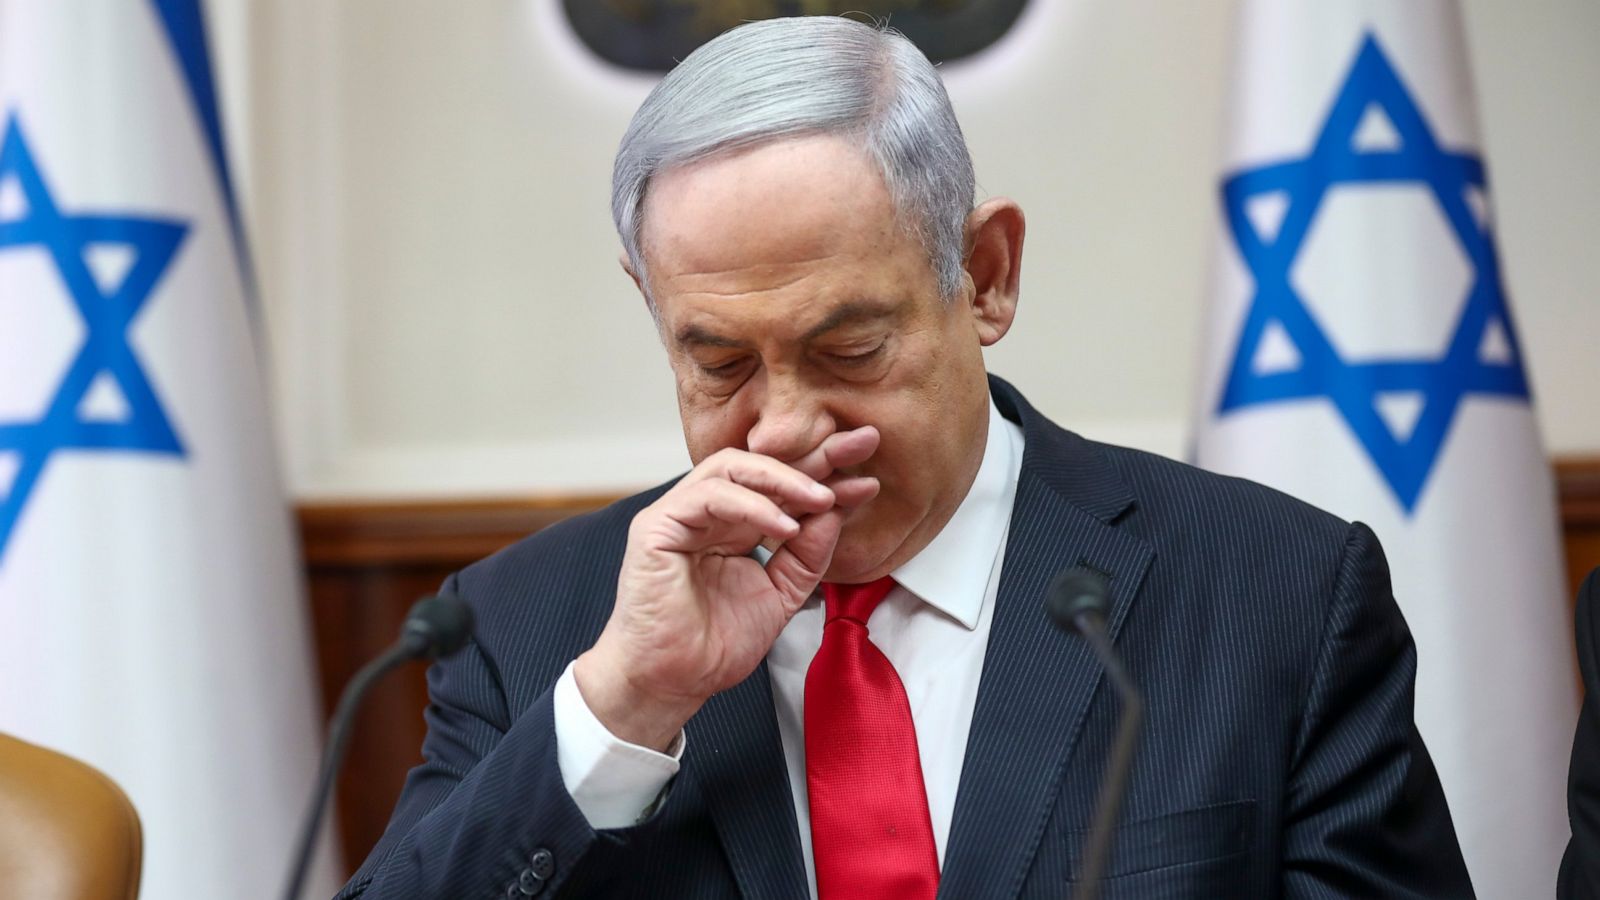 Israeli court rejects Netanyahu request to delay trial - ABC News